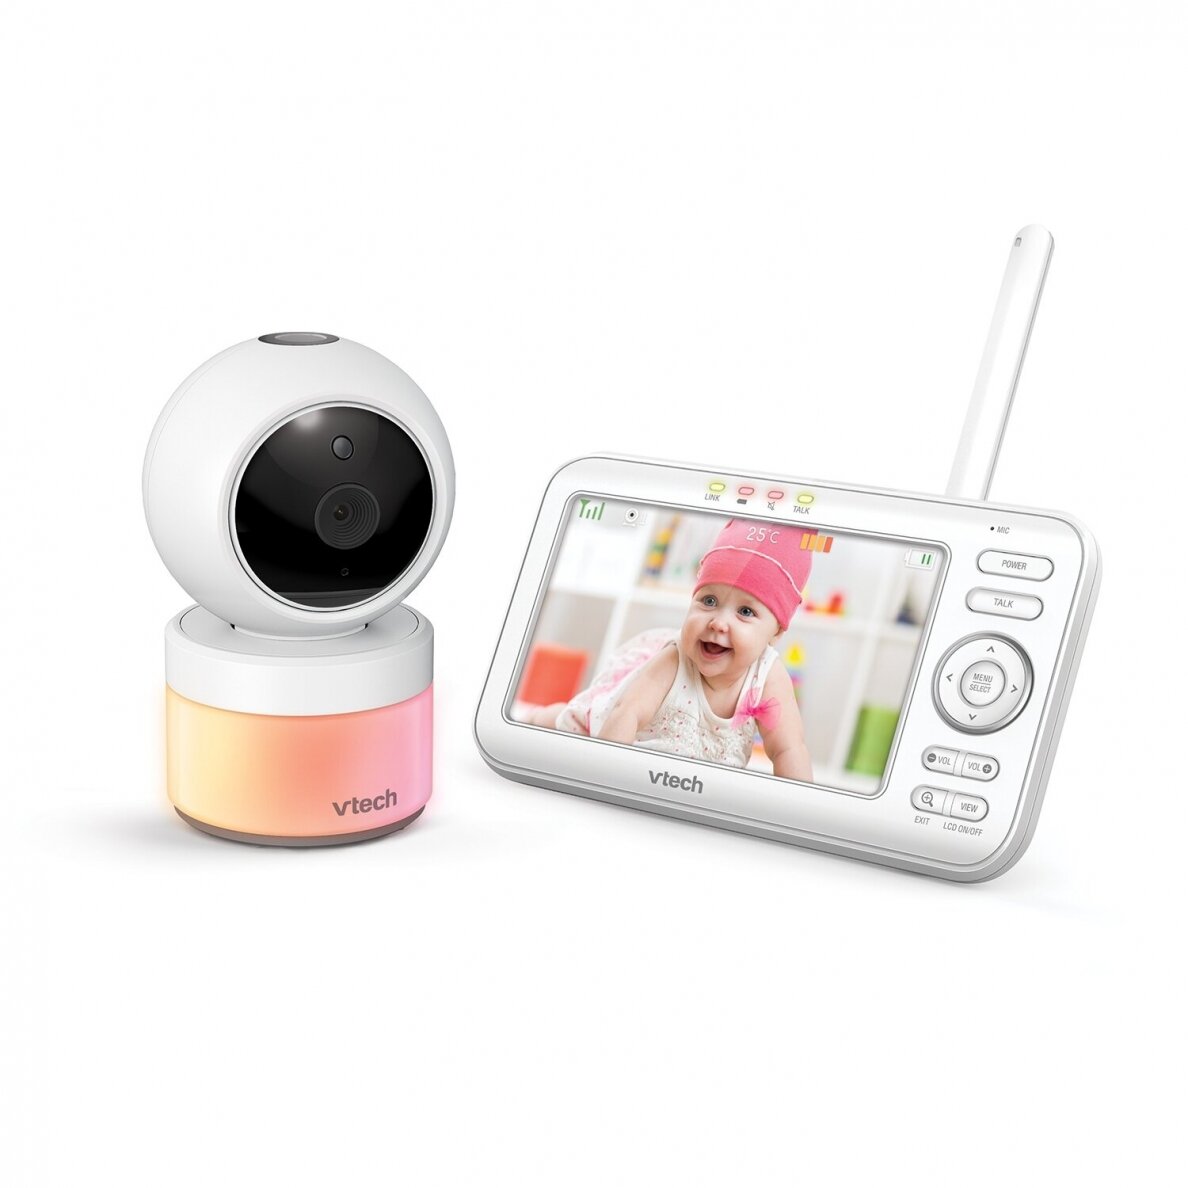 Vtech 5 inch digital video baby monitor with pan and tilt camera VM5463